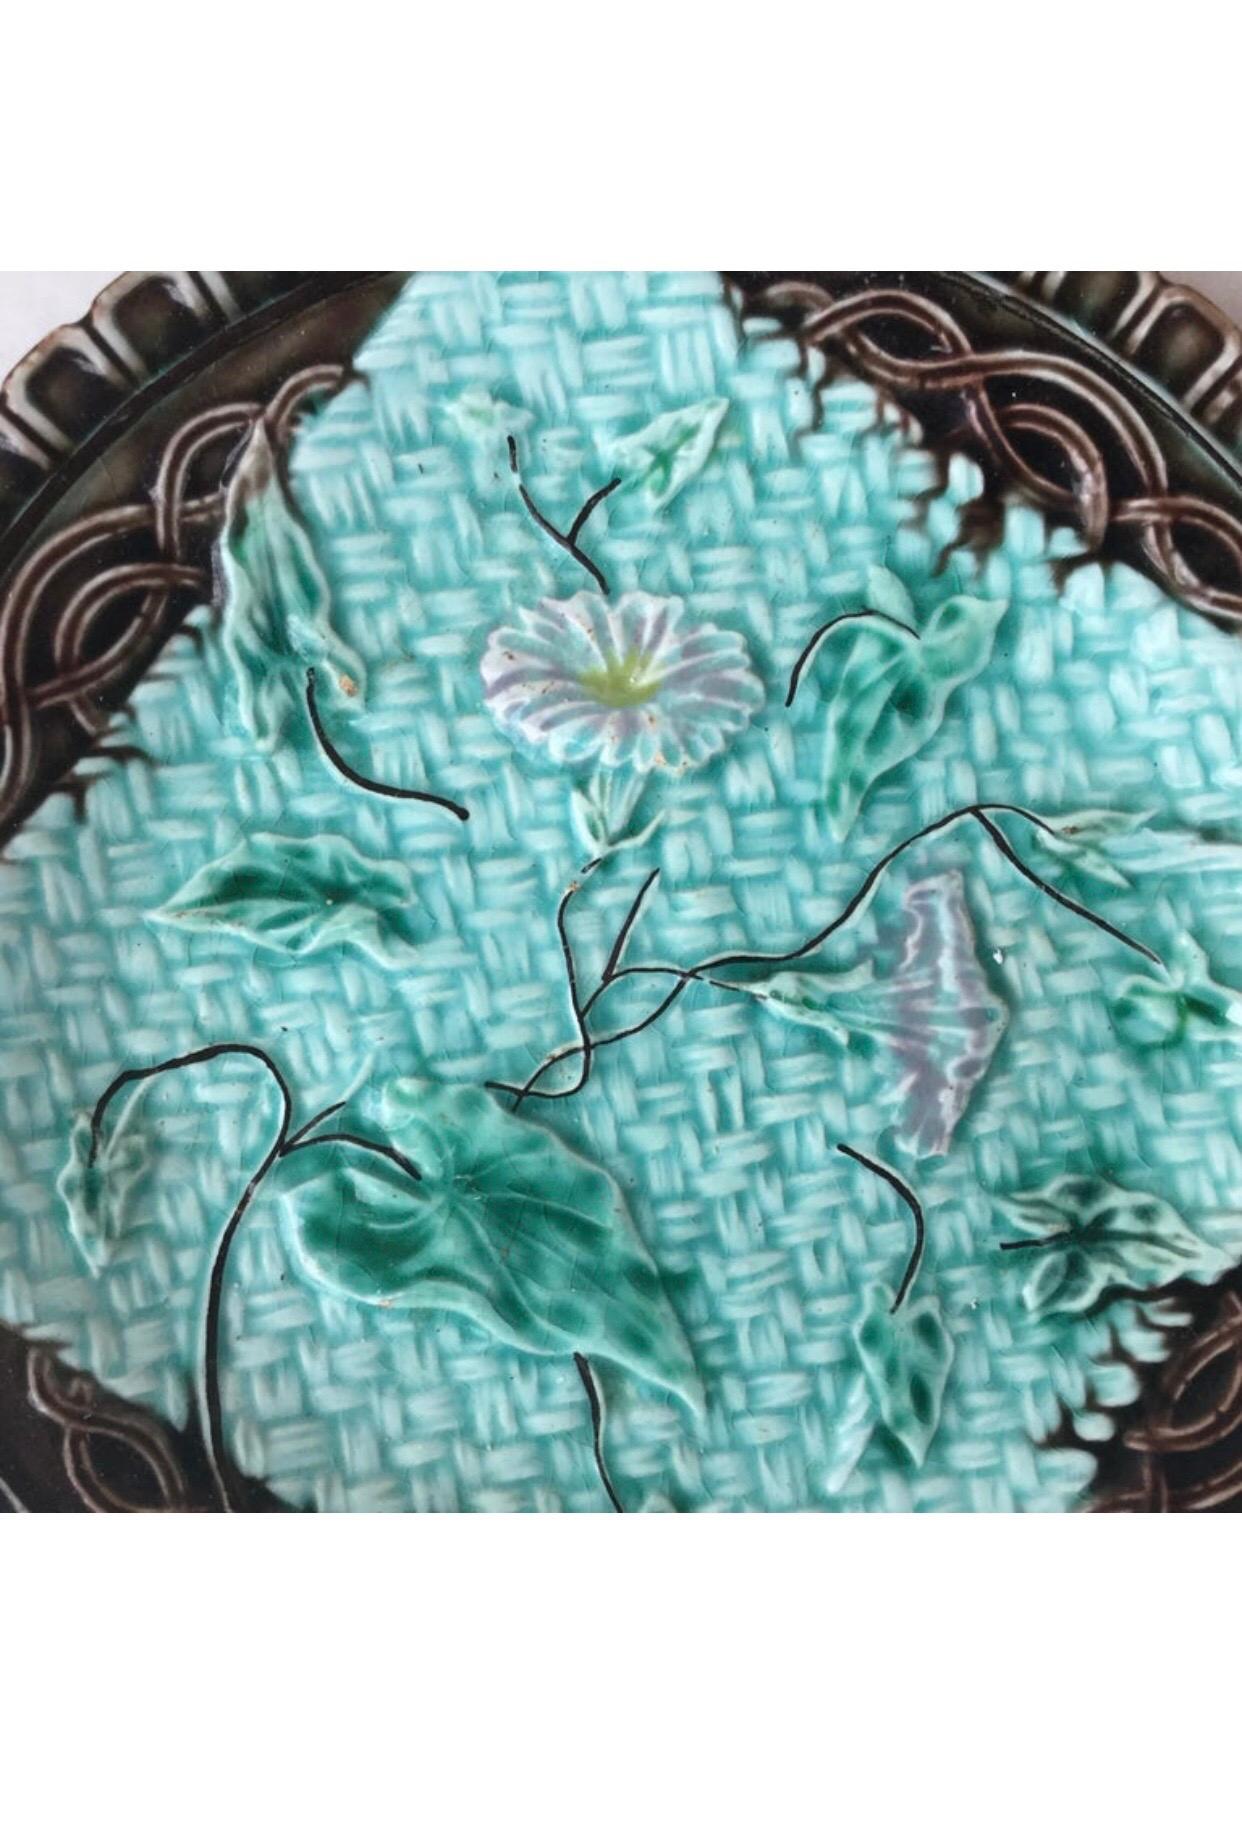 Art Nouveau German Majolica Plate with Morning Glory, circa 1900 For Sale